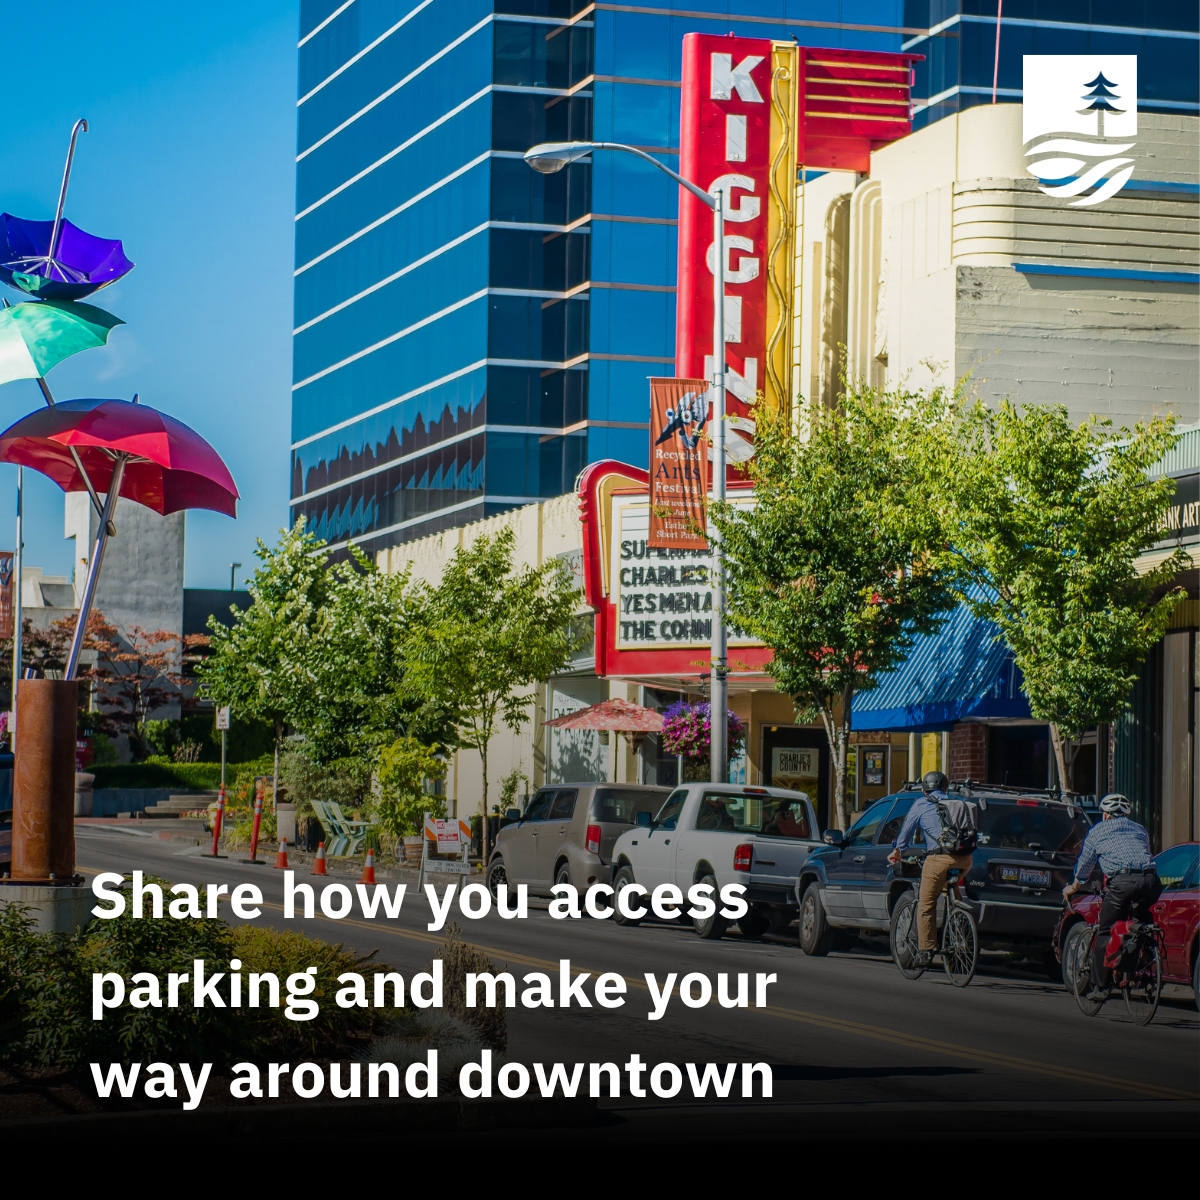 We're looking for input on how you park and make your way around downtown #vanwa. 🅿️

📢Take our short survey survey.alchemer.com/s3/7793582/Van…